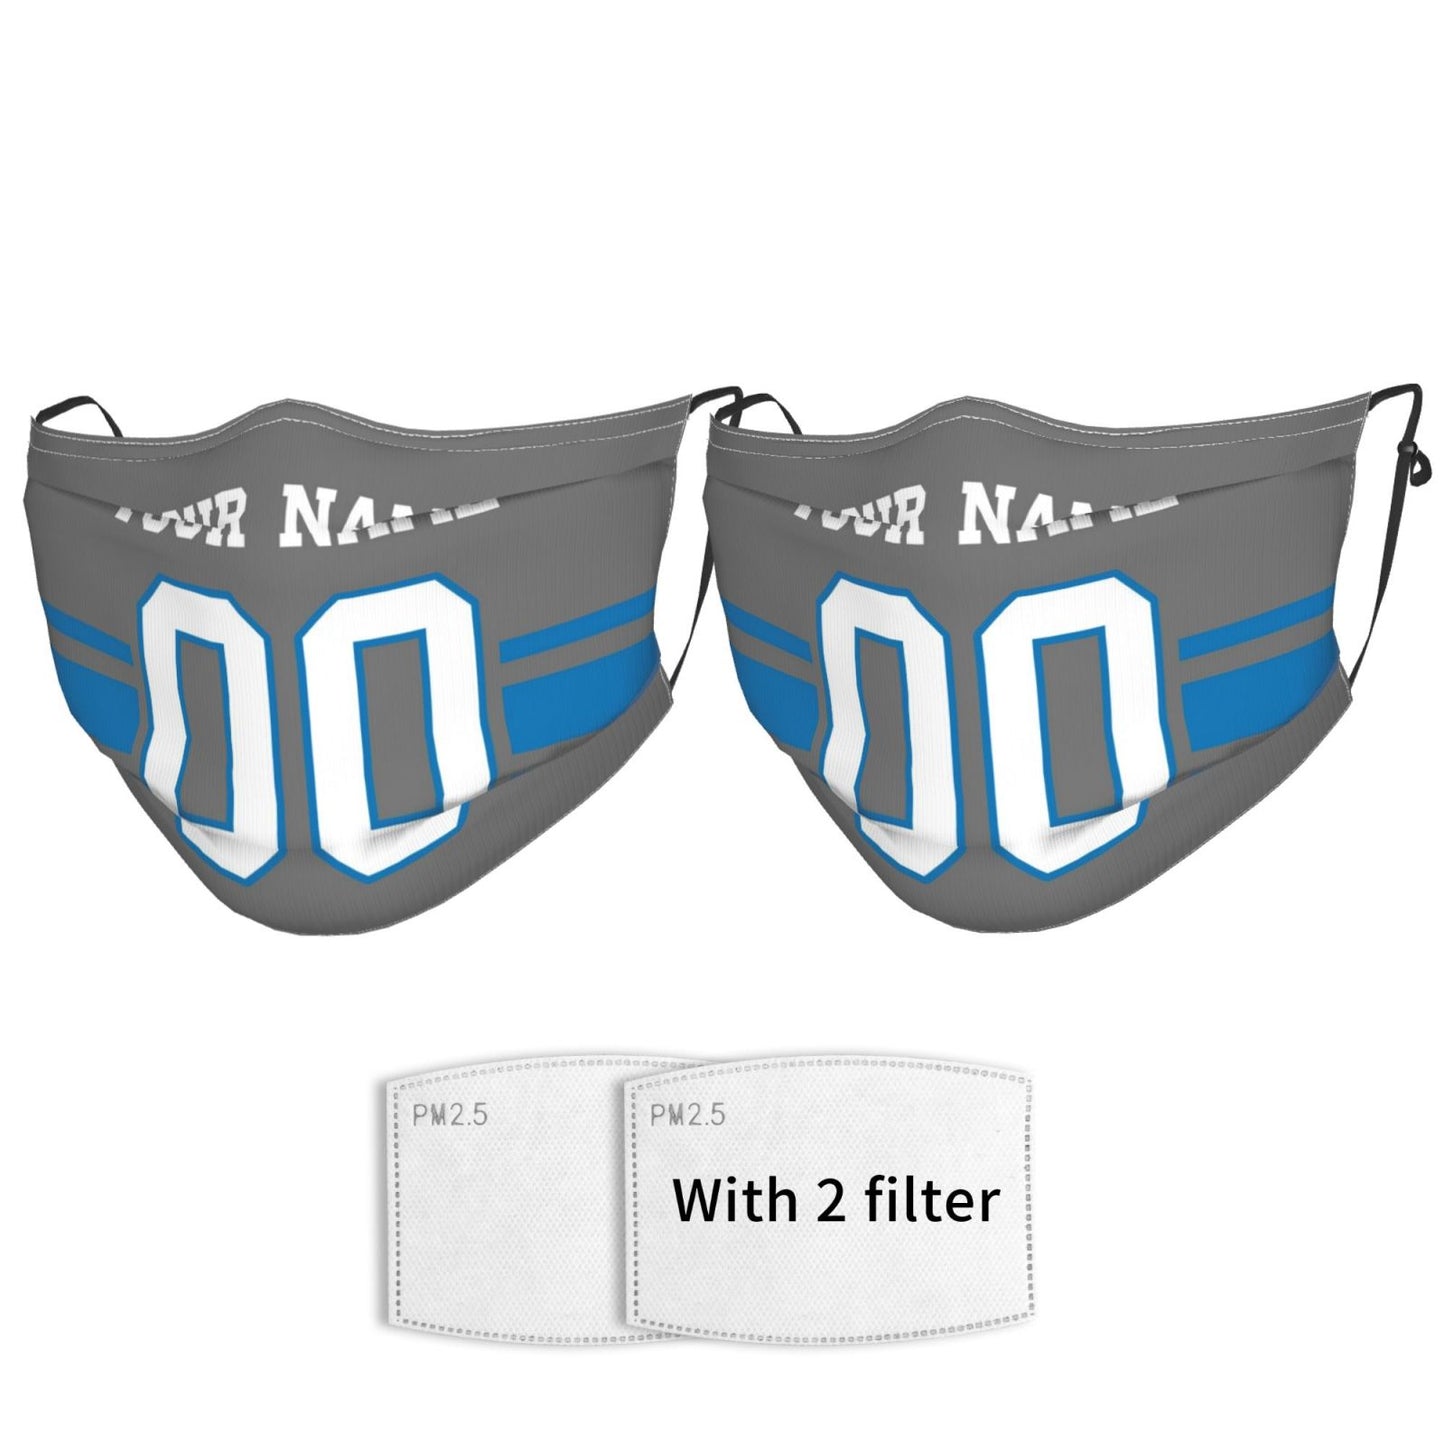 2-Pack Detroit Lions Face Covering Football Team Decorative Adult Face Mask With Filters PM 2.5 Gray